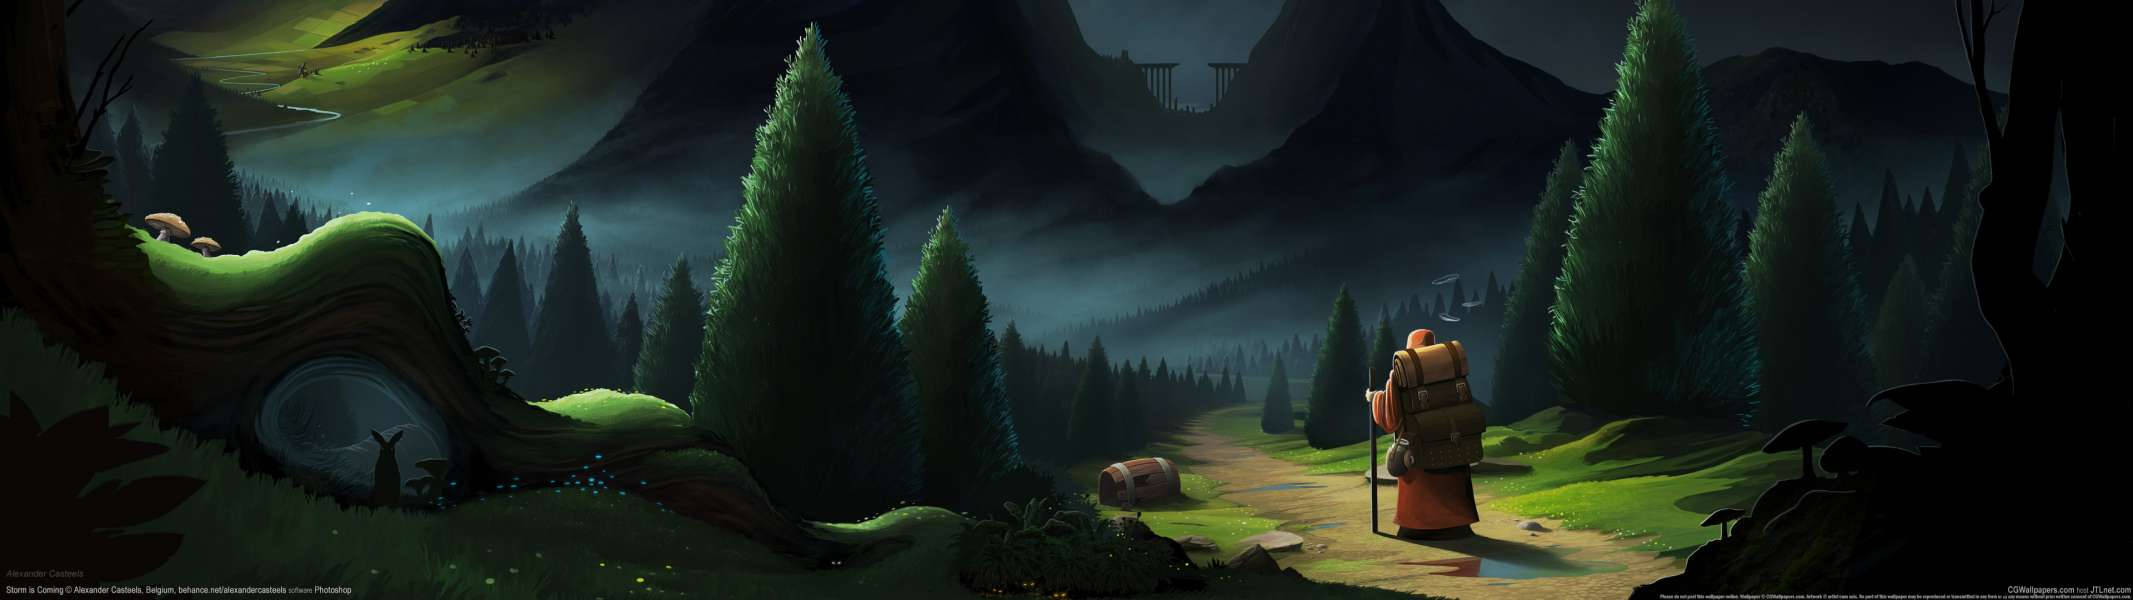 Dual Screen Animated Pine Forest Wallpaper